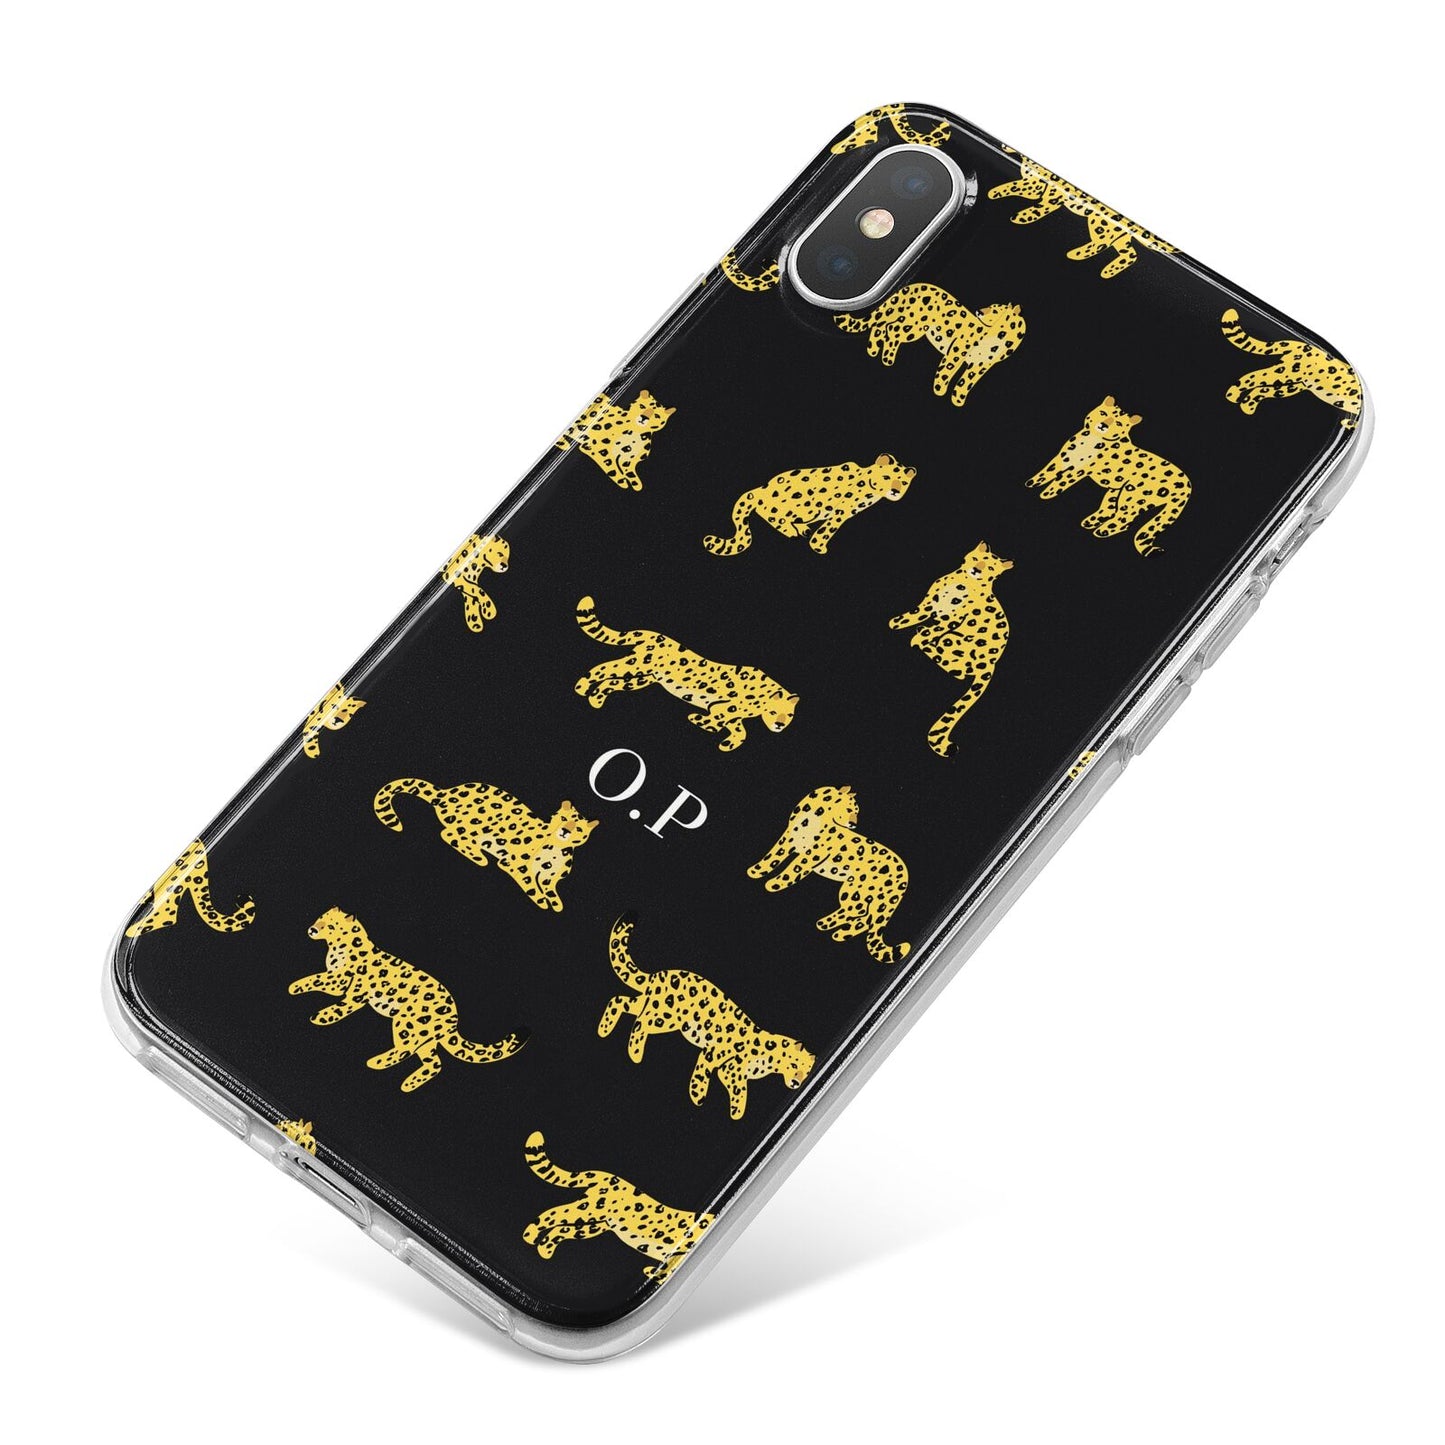 Prowling Leopard iPhone X Bumper Case on Silver iPhone